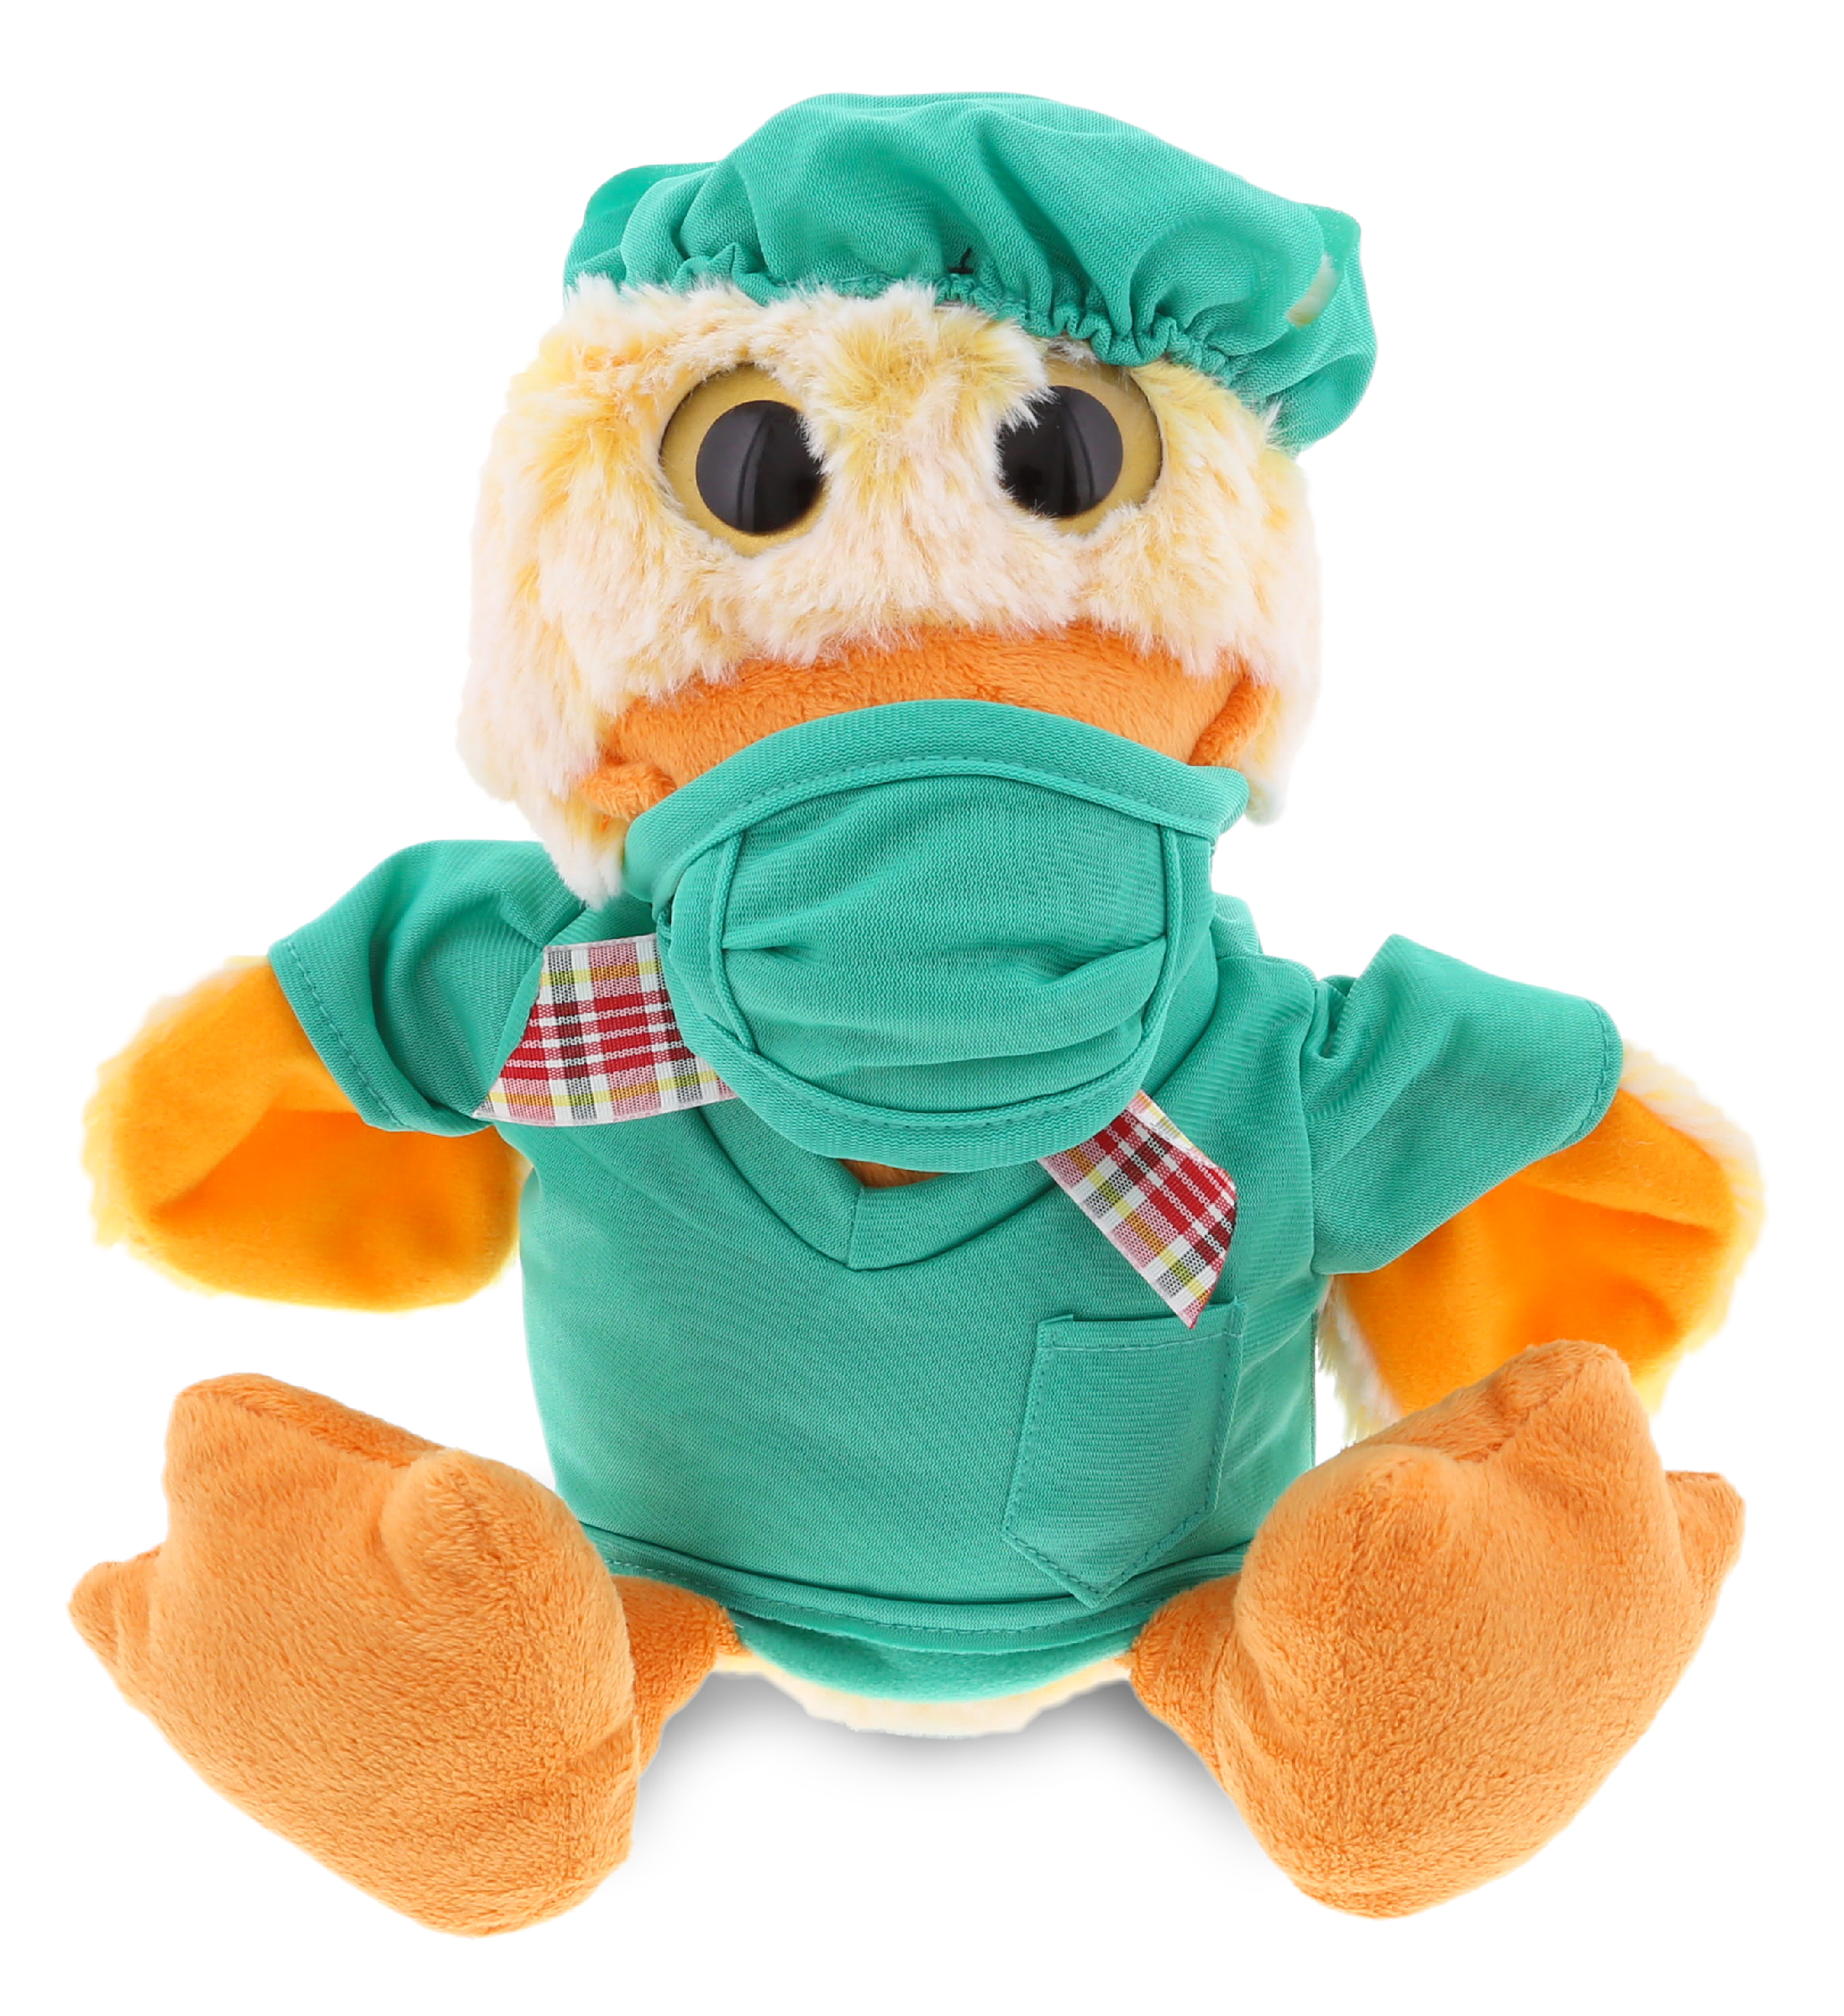 DolliBu Sitting Duck Doctor Plush Toy – Super Soft Yellow Duck Doctor Stuffed  Animal Dress Up with Cute Scrub Uniform & Cap Outfit – Fluffy Doctor Toy  Plush Gift – 9″ Inches - DolliBu